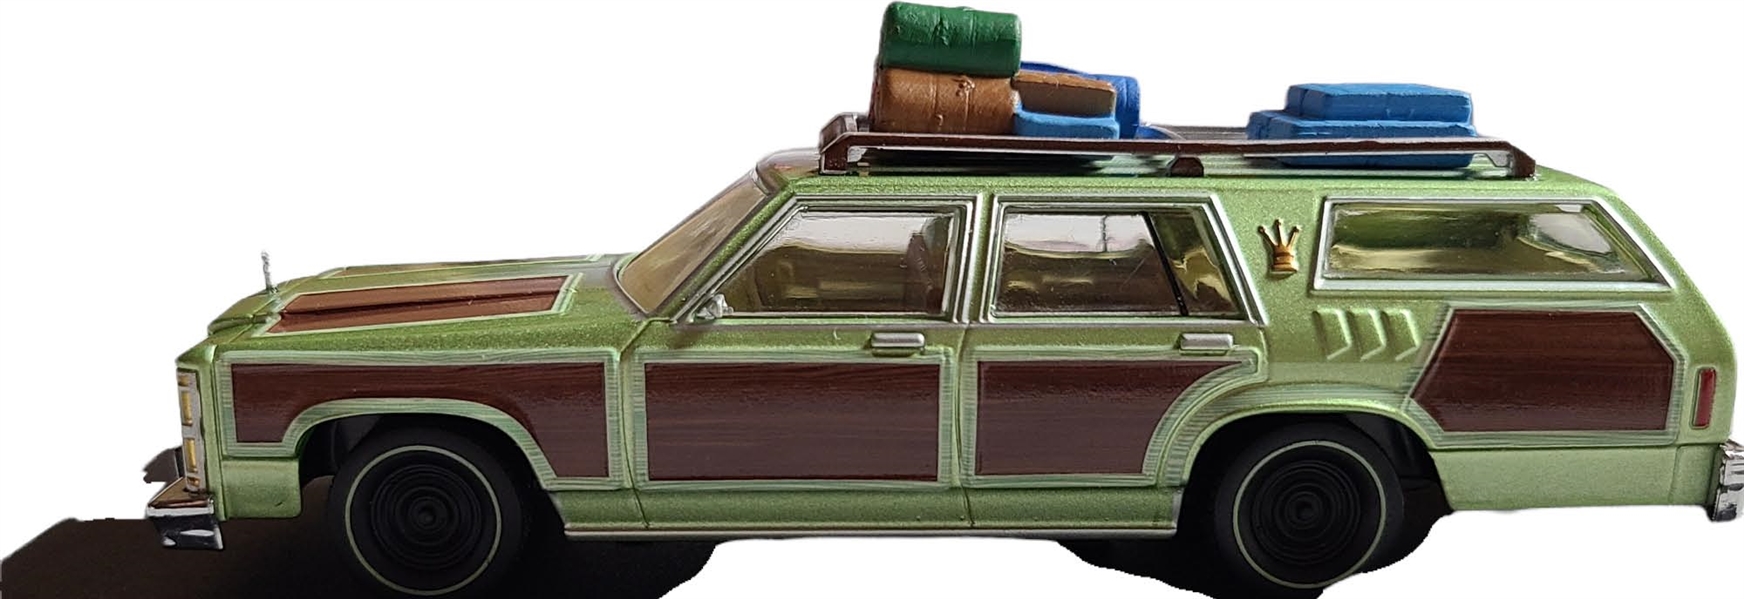 Chevy Chase Autographed Vacation Model Car (Beckett/BAS)